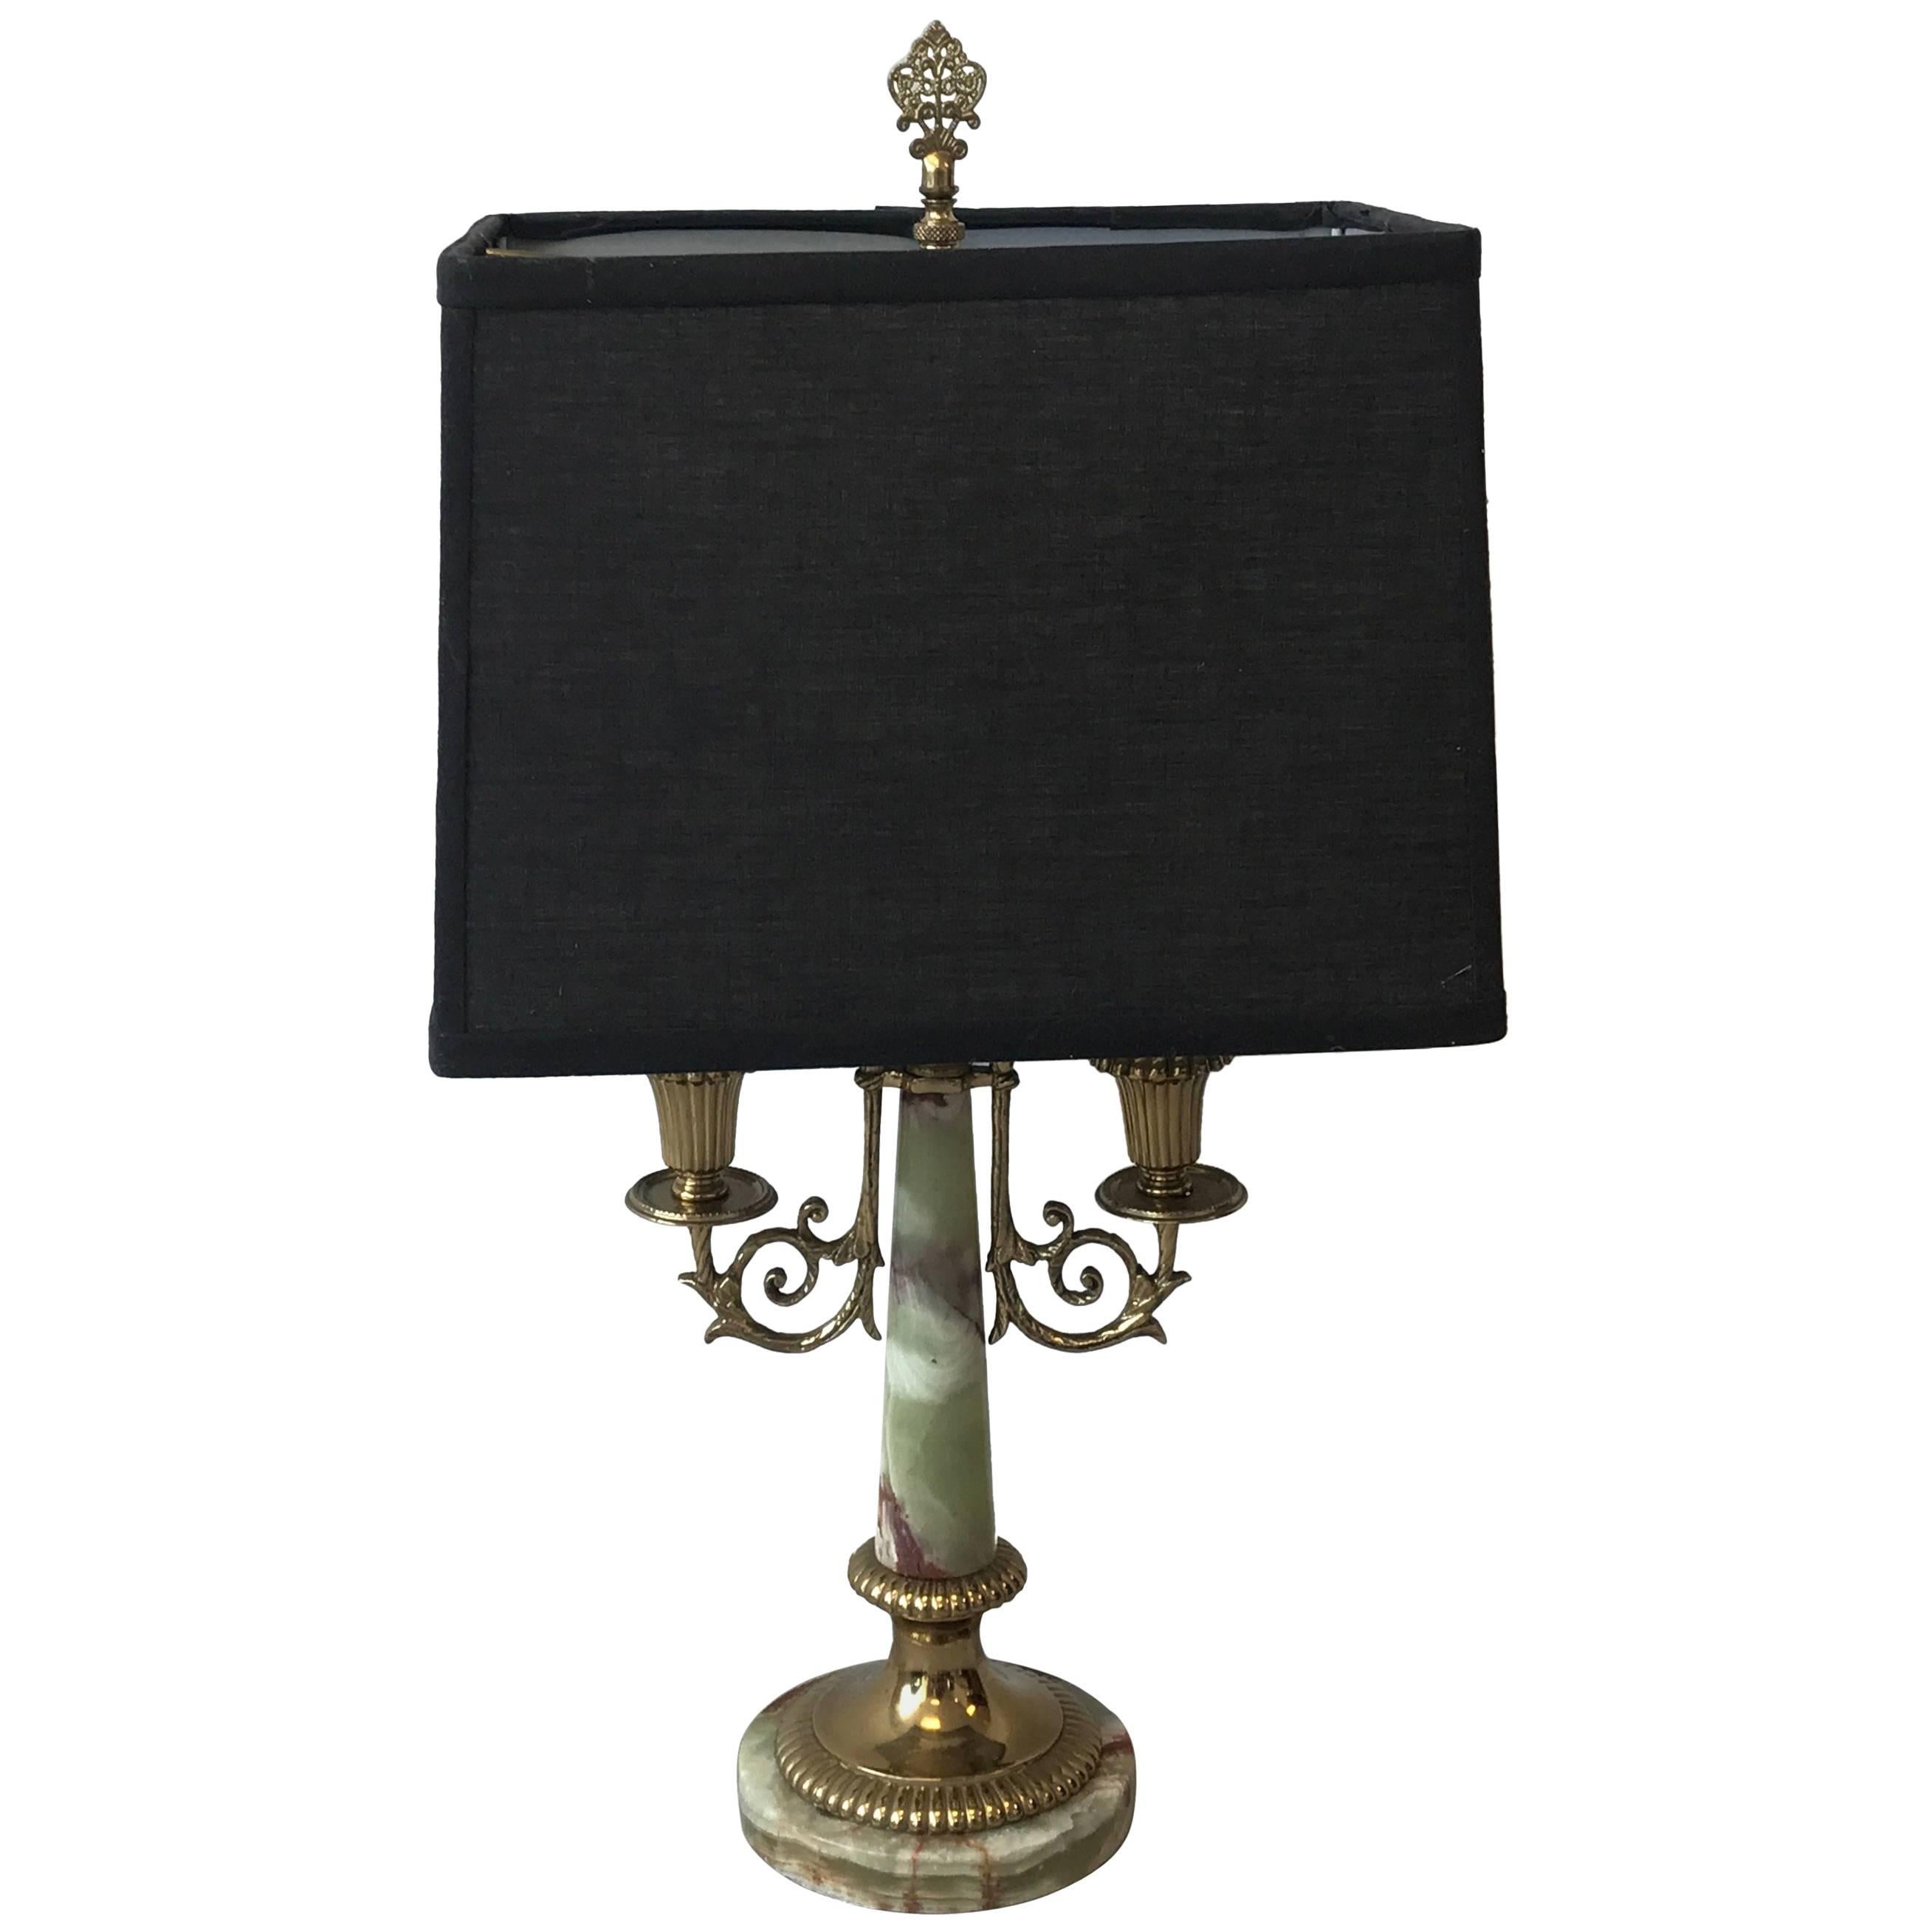 1940s Italian Brass and Onyx Bouillotte Candlestick Lamp with Shade For Sale